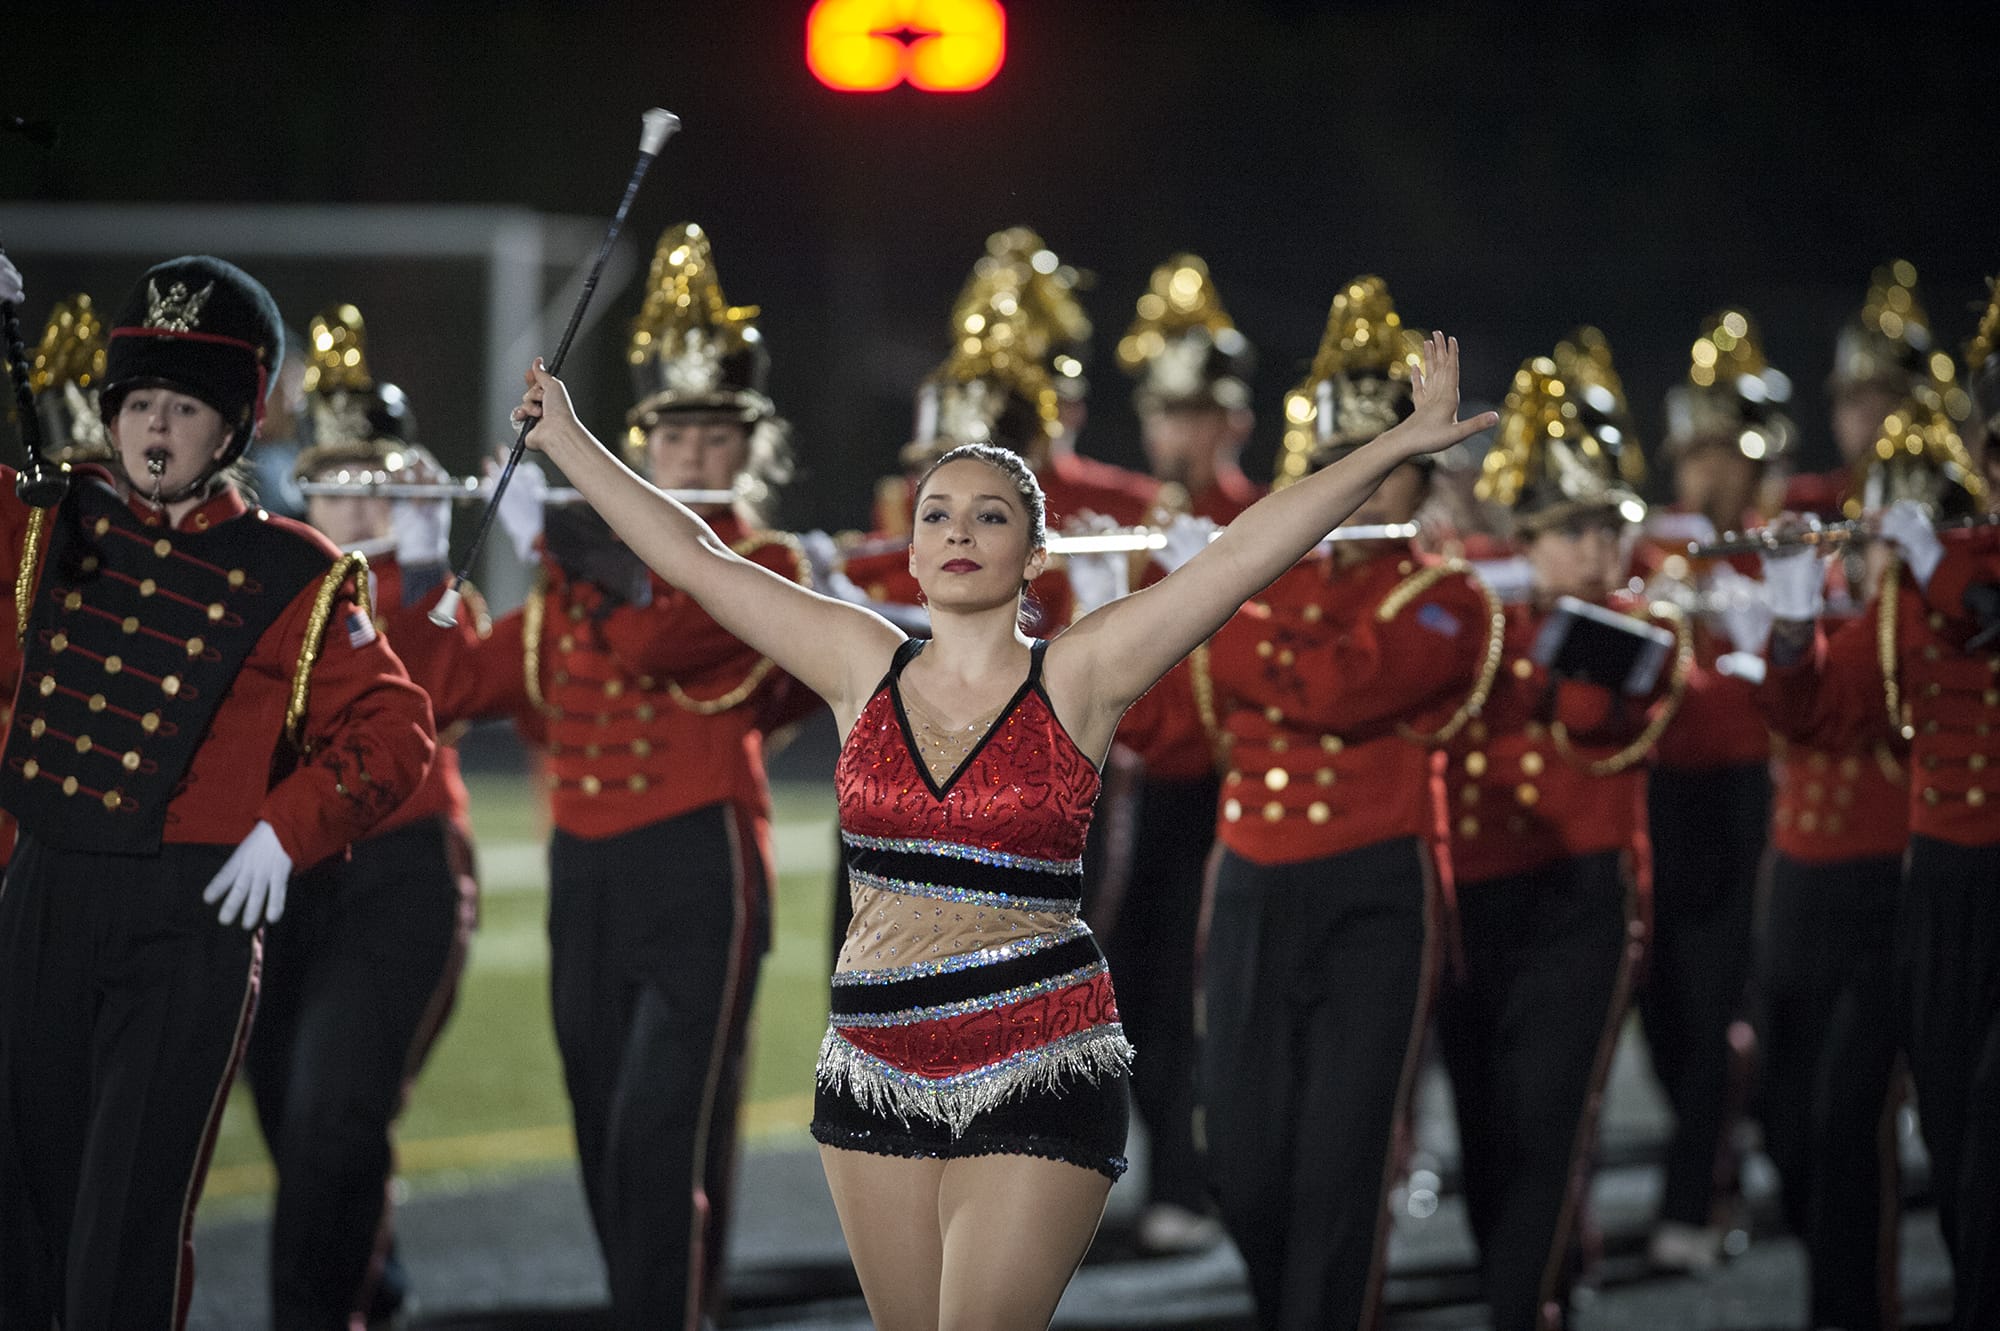 A member of the Camas marching band performs before the playoff game at Doc Harris Stadium in Camas, Friday November 11, 2016.